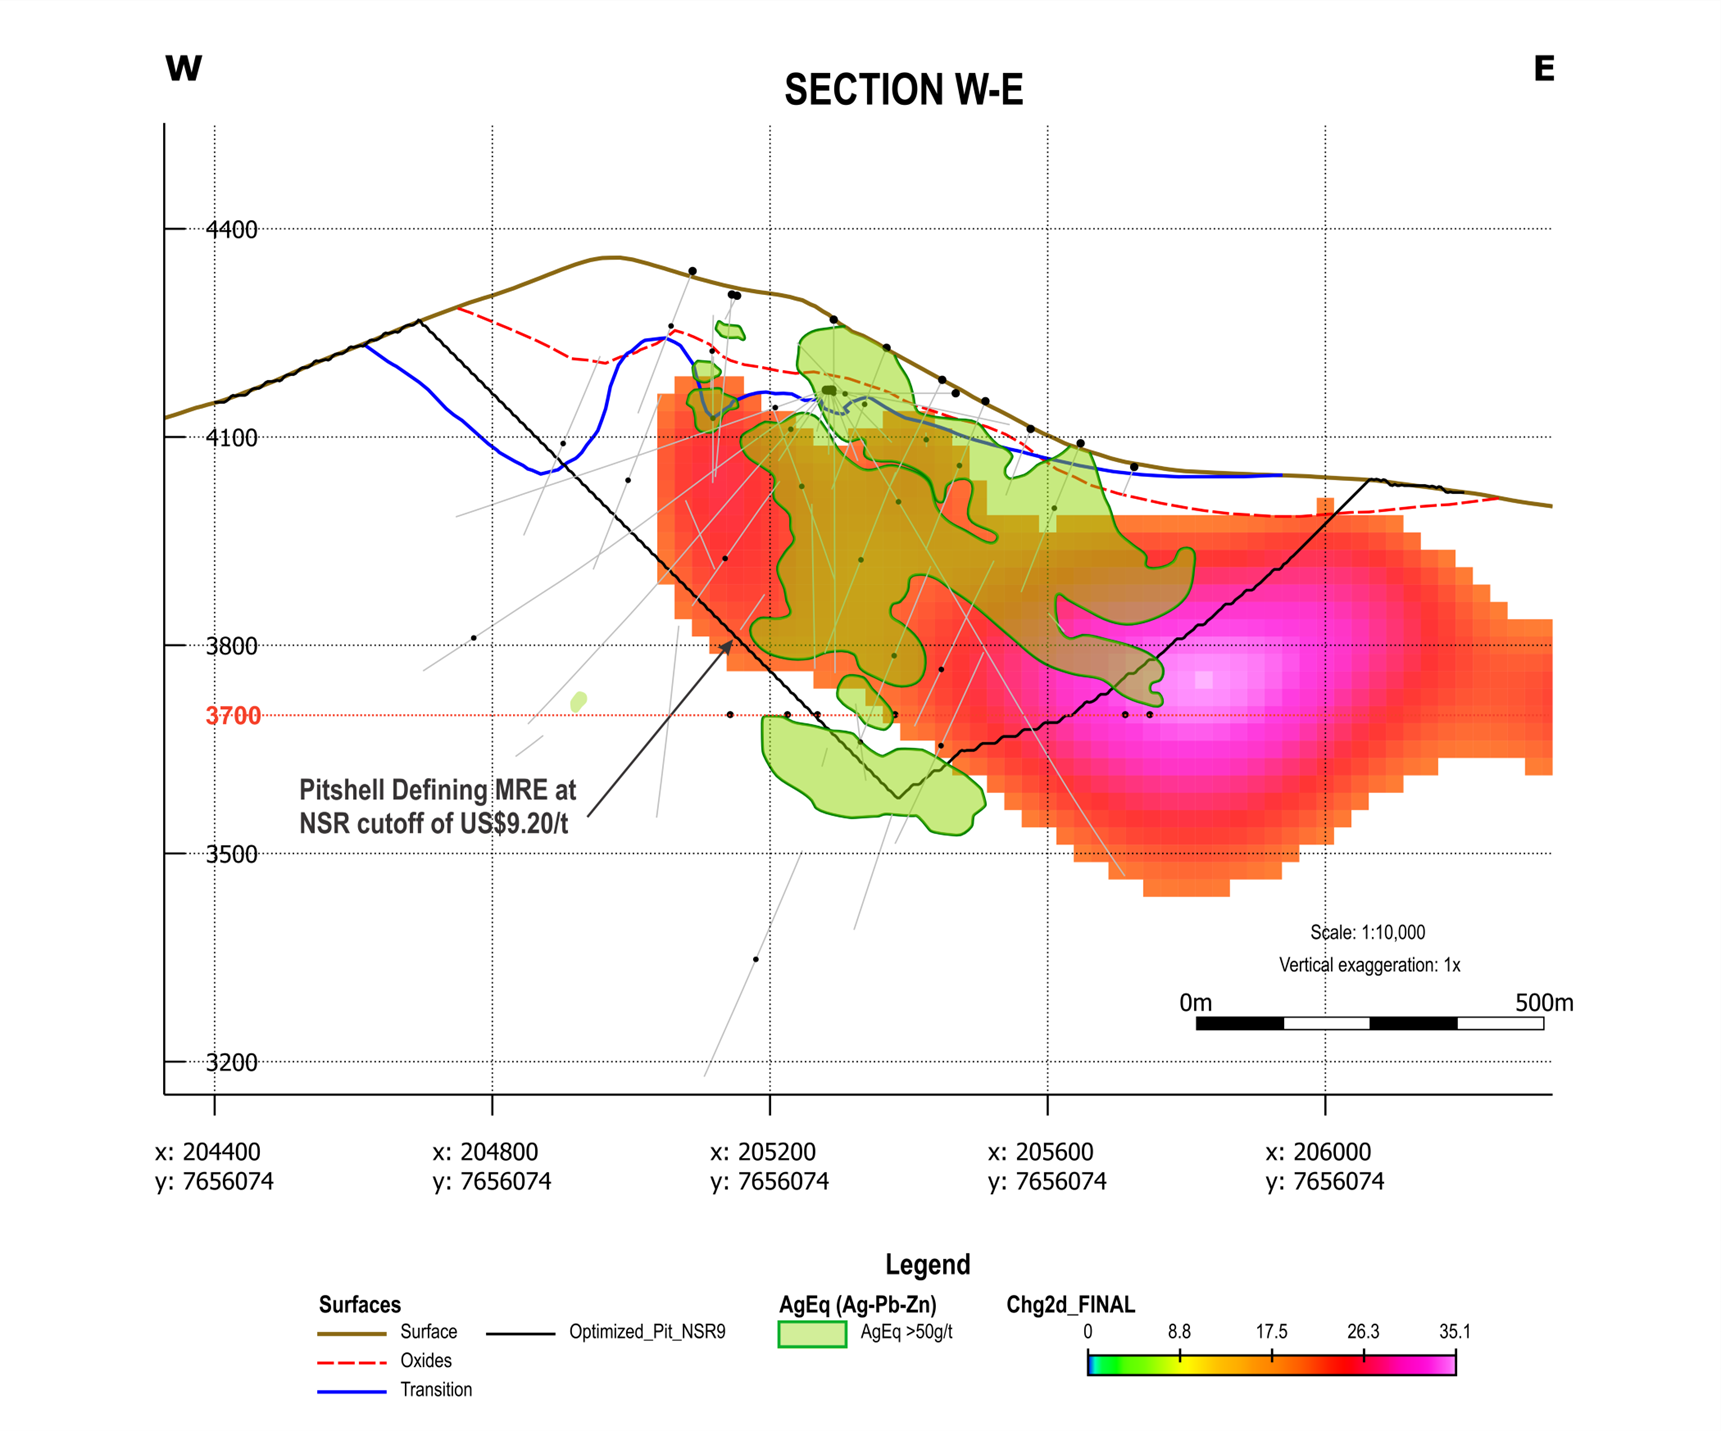 Cross Section along Line 56100N of the Chargeability Anomaly with areas with greater than 50 g Ag eq/t superimposed to show the very strong correlation.  The strong anomaly to the southeast is largely outside the open pit defining the MRE and this area has not been drilled.  Figures 2 and 3 show the location of the section line.